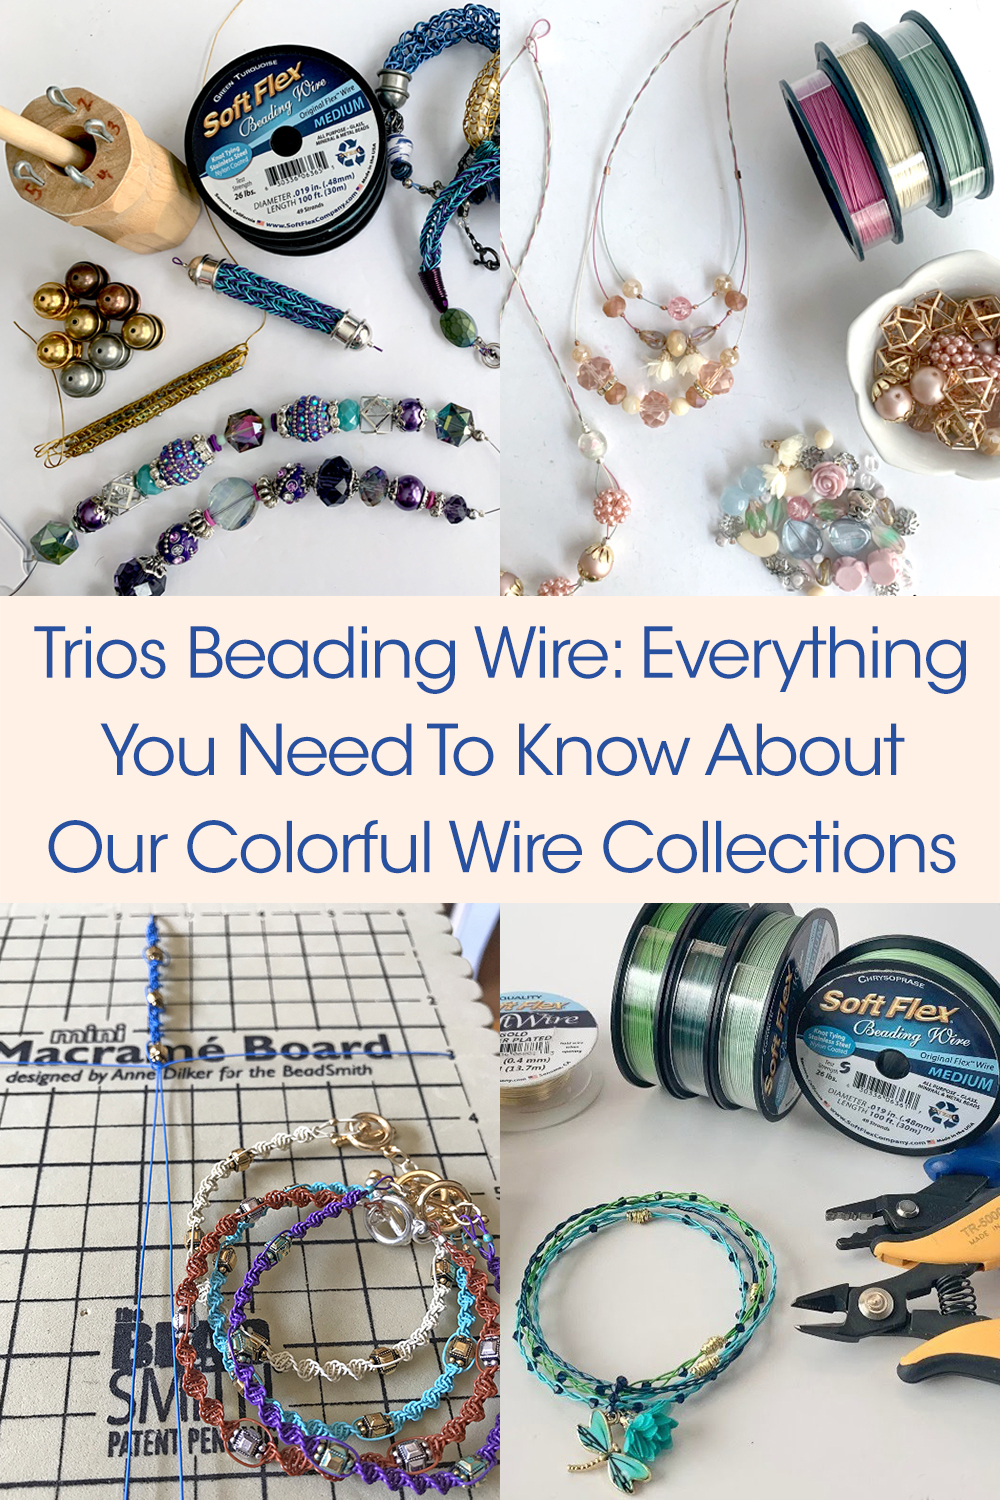 Trios Beading Wire: Everything You Need To Know About Our Colorful